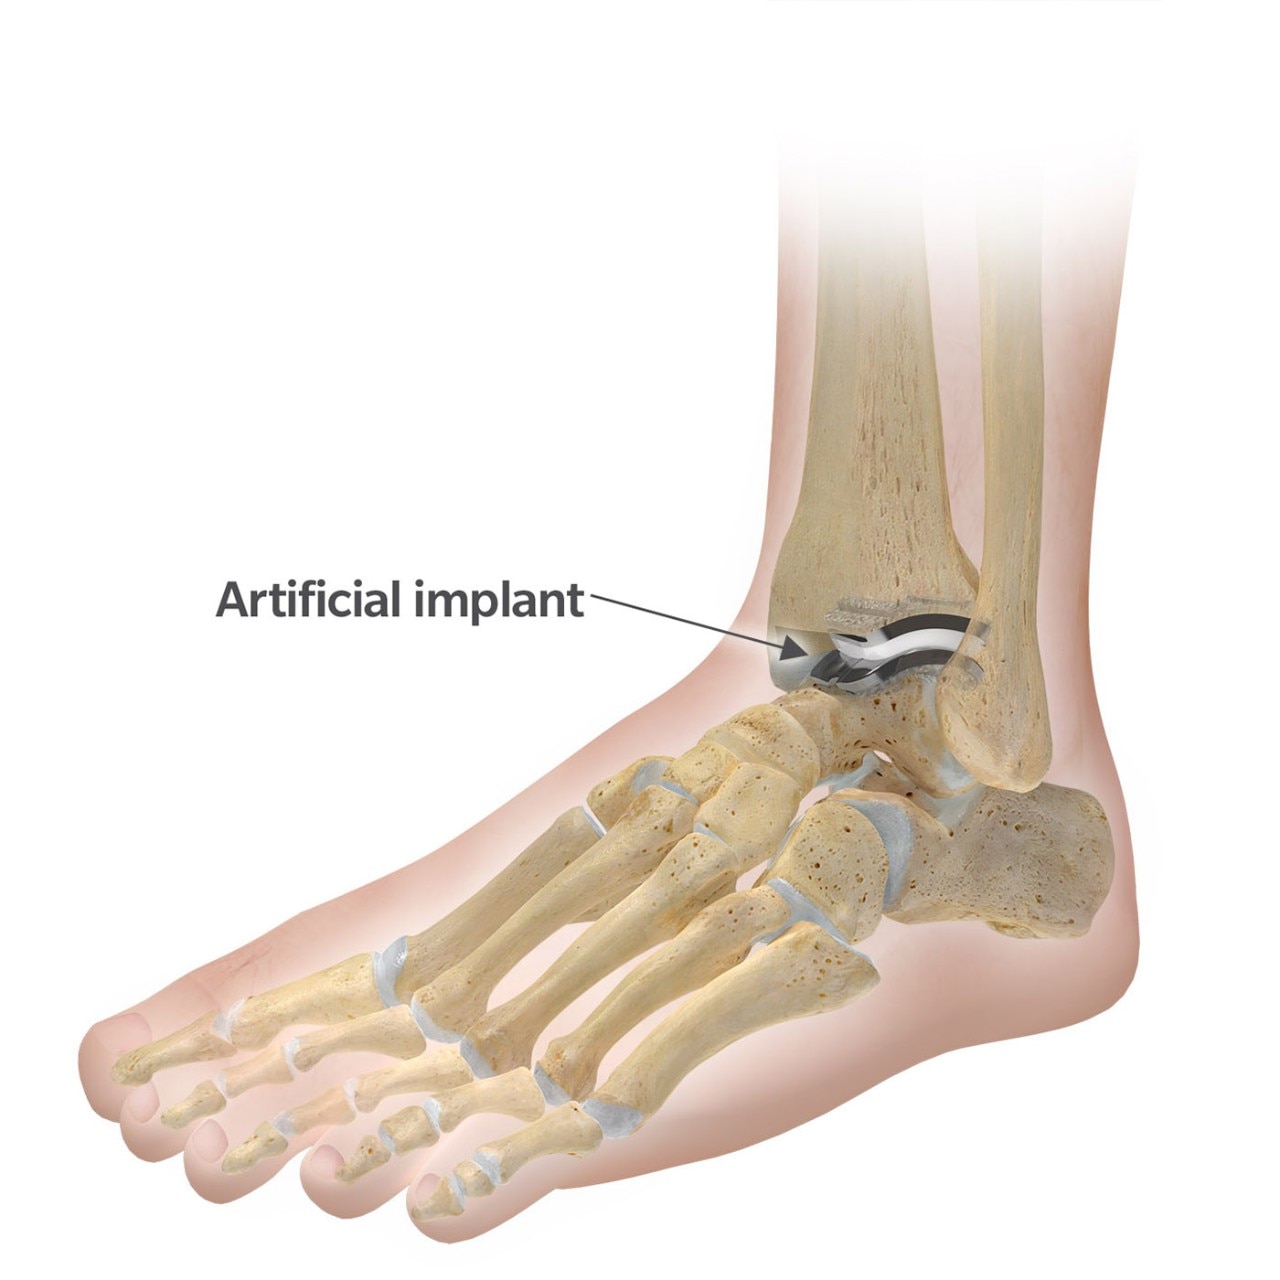 Artificial implant